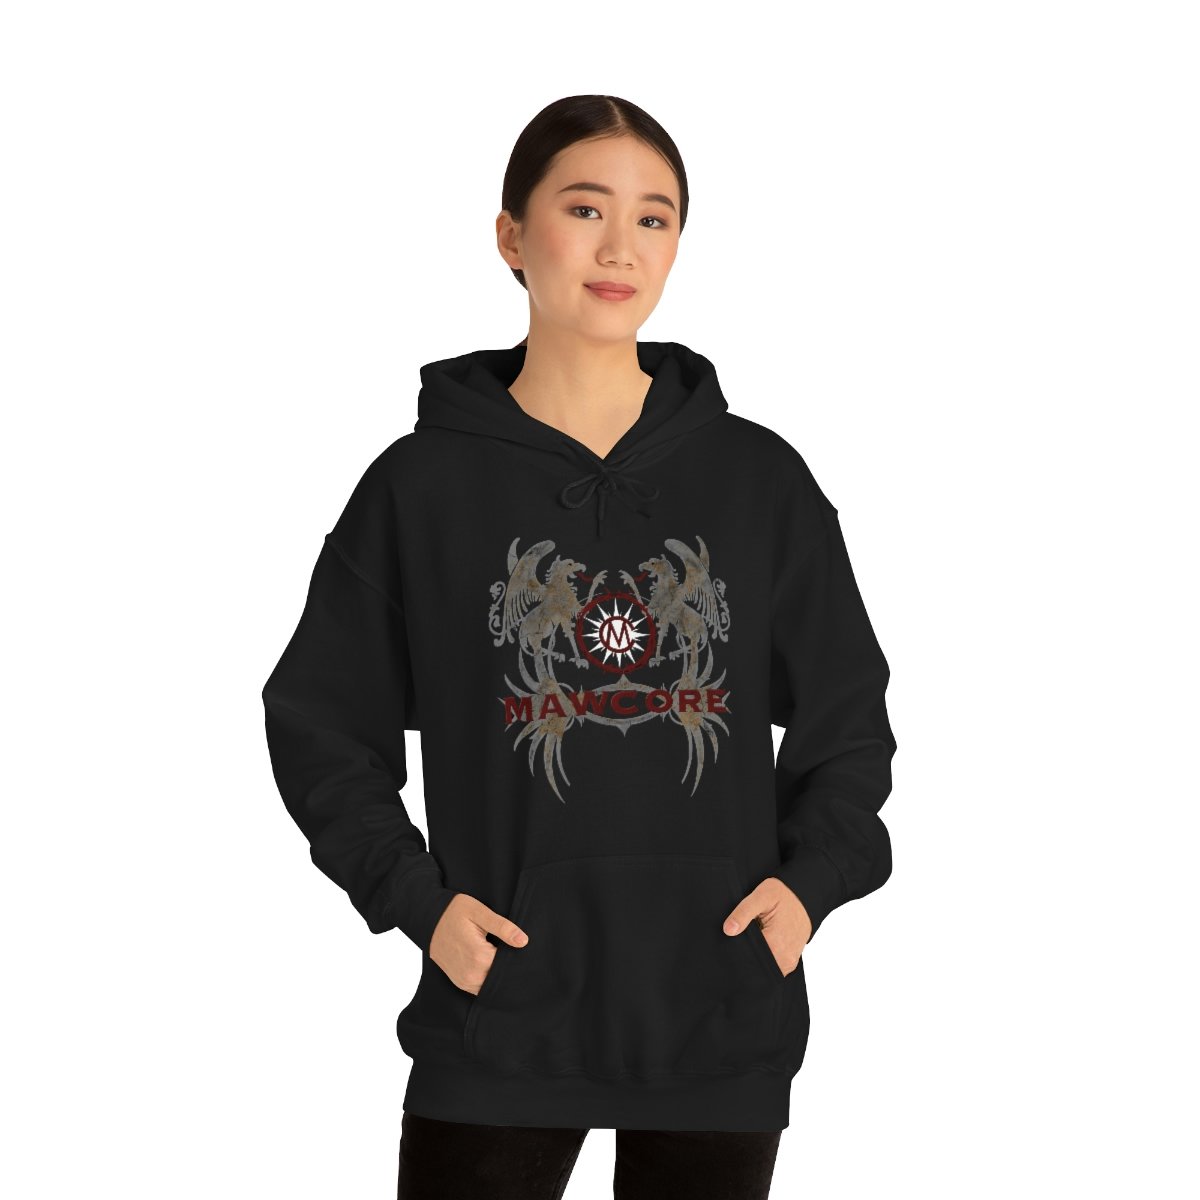 Mawcore Griffin Crest Pullover Hooded Sweatshirt